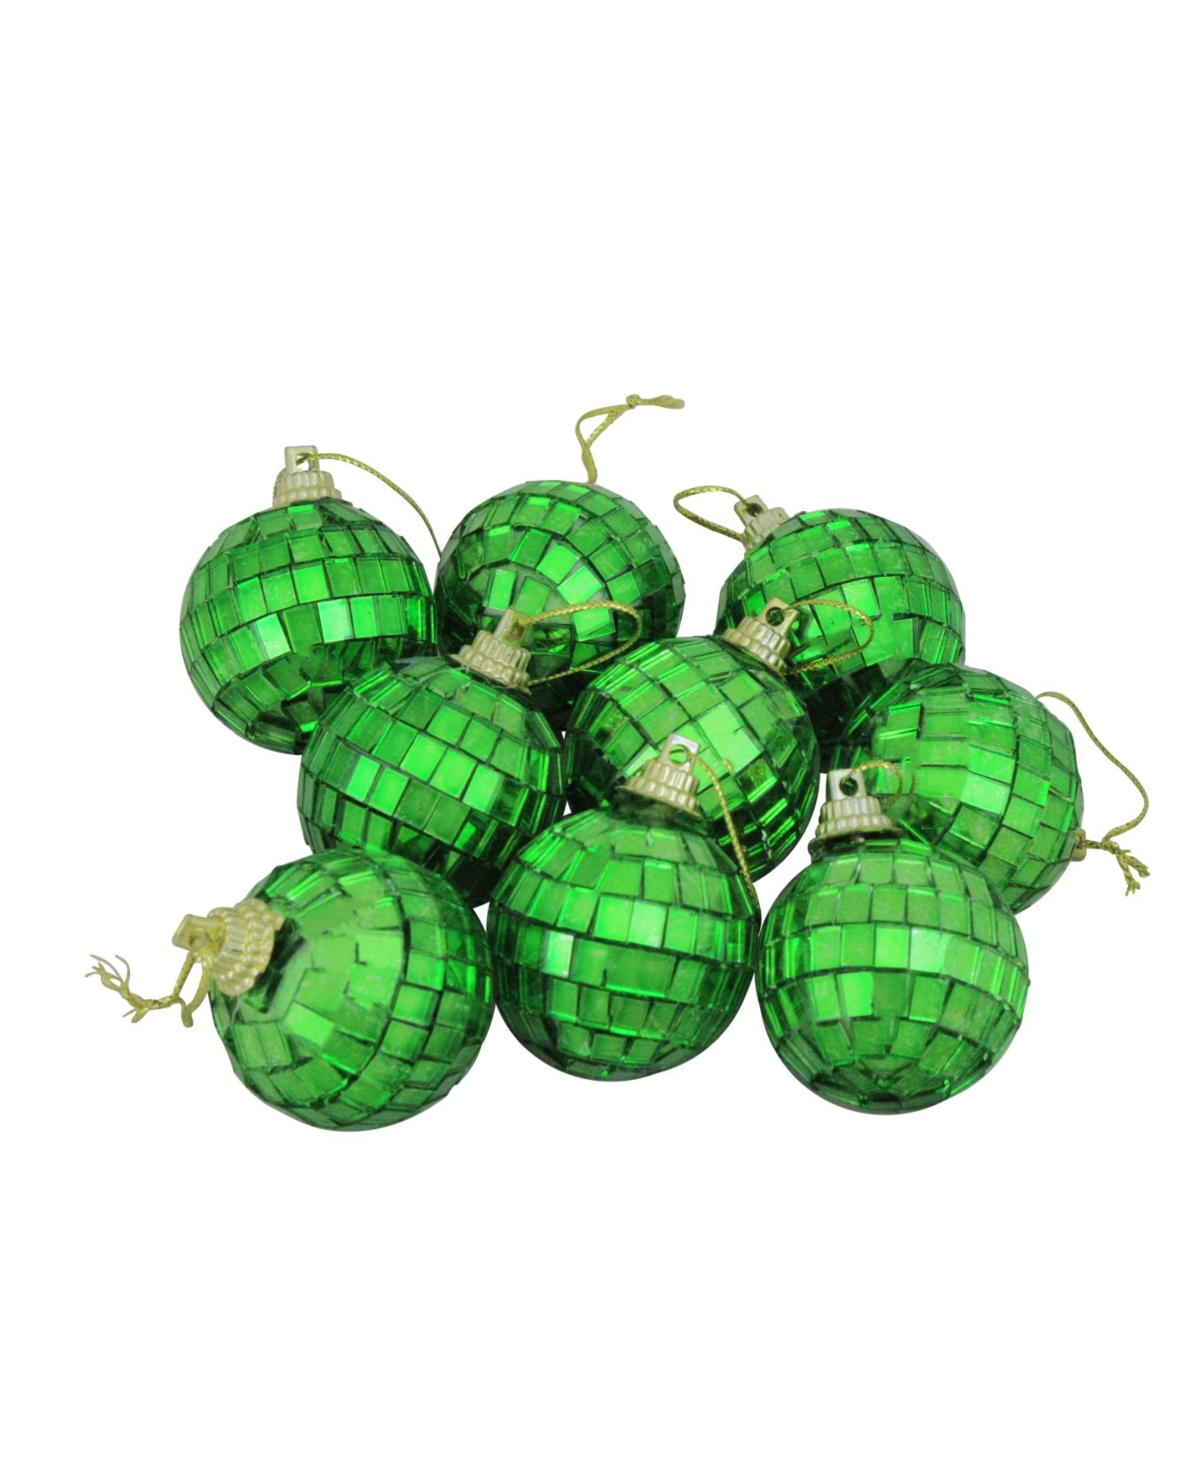 Northlight 9ct Green Mirrored Glass Disco Ball Christmas Ornaments 1.5" 40mm